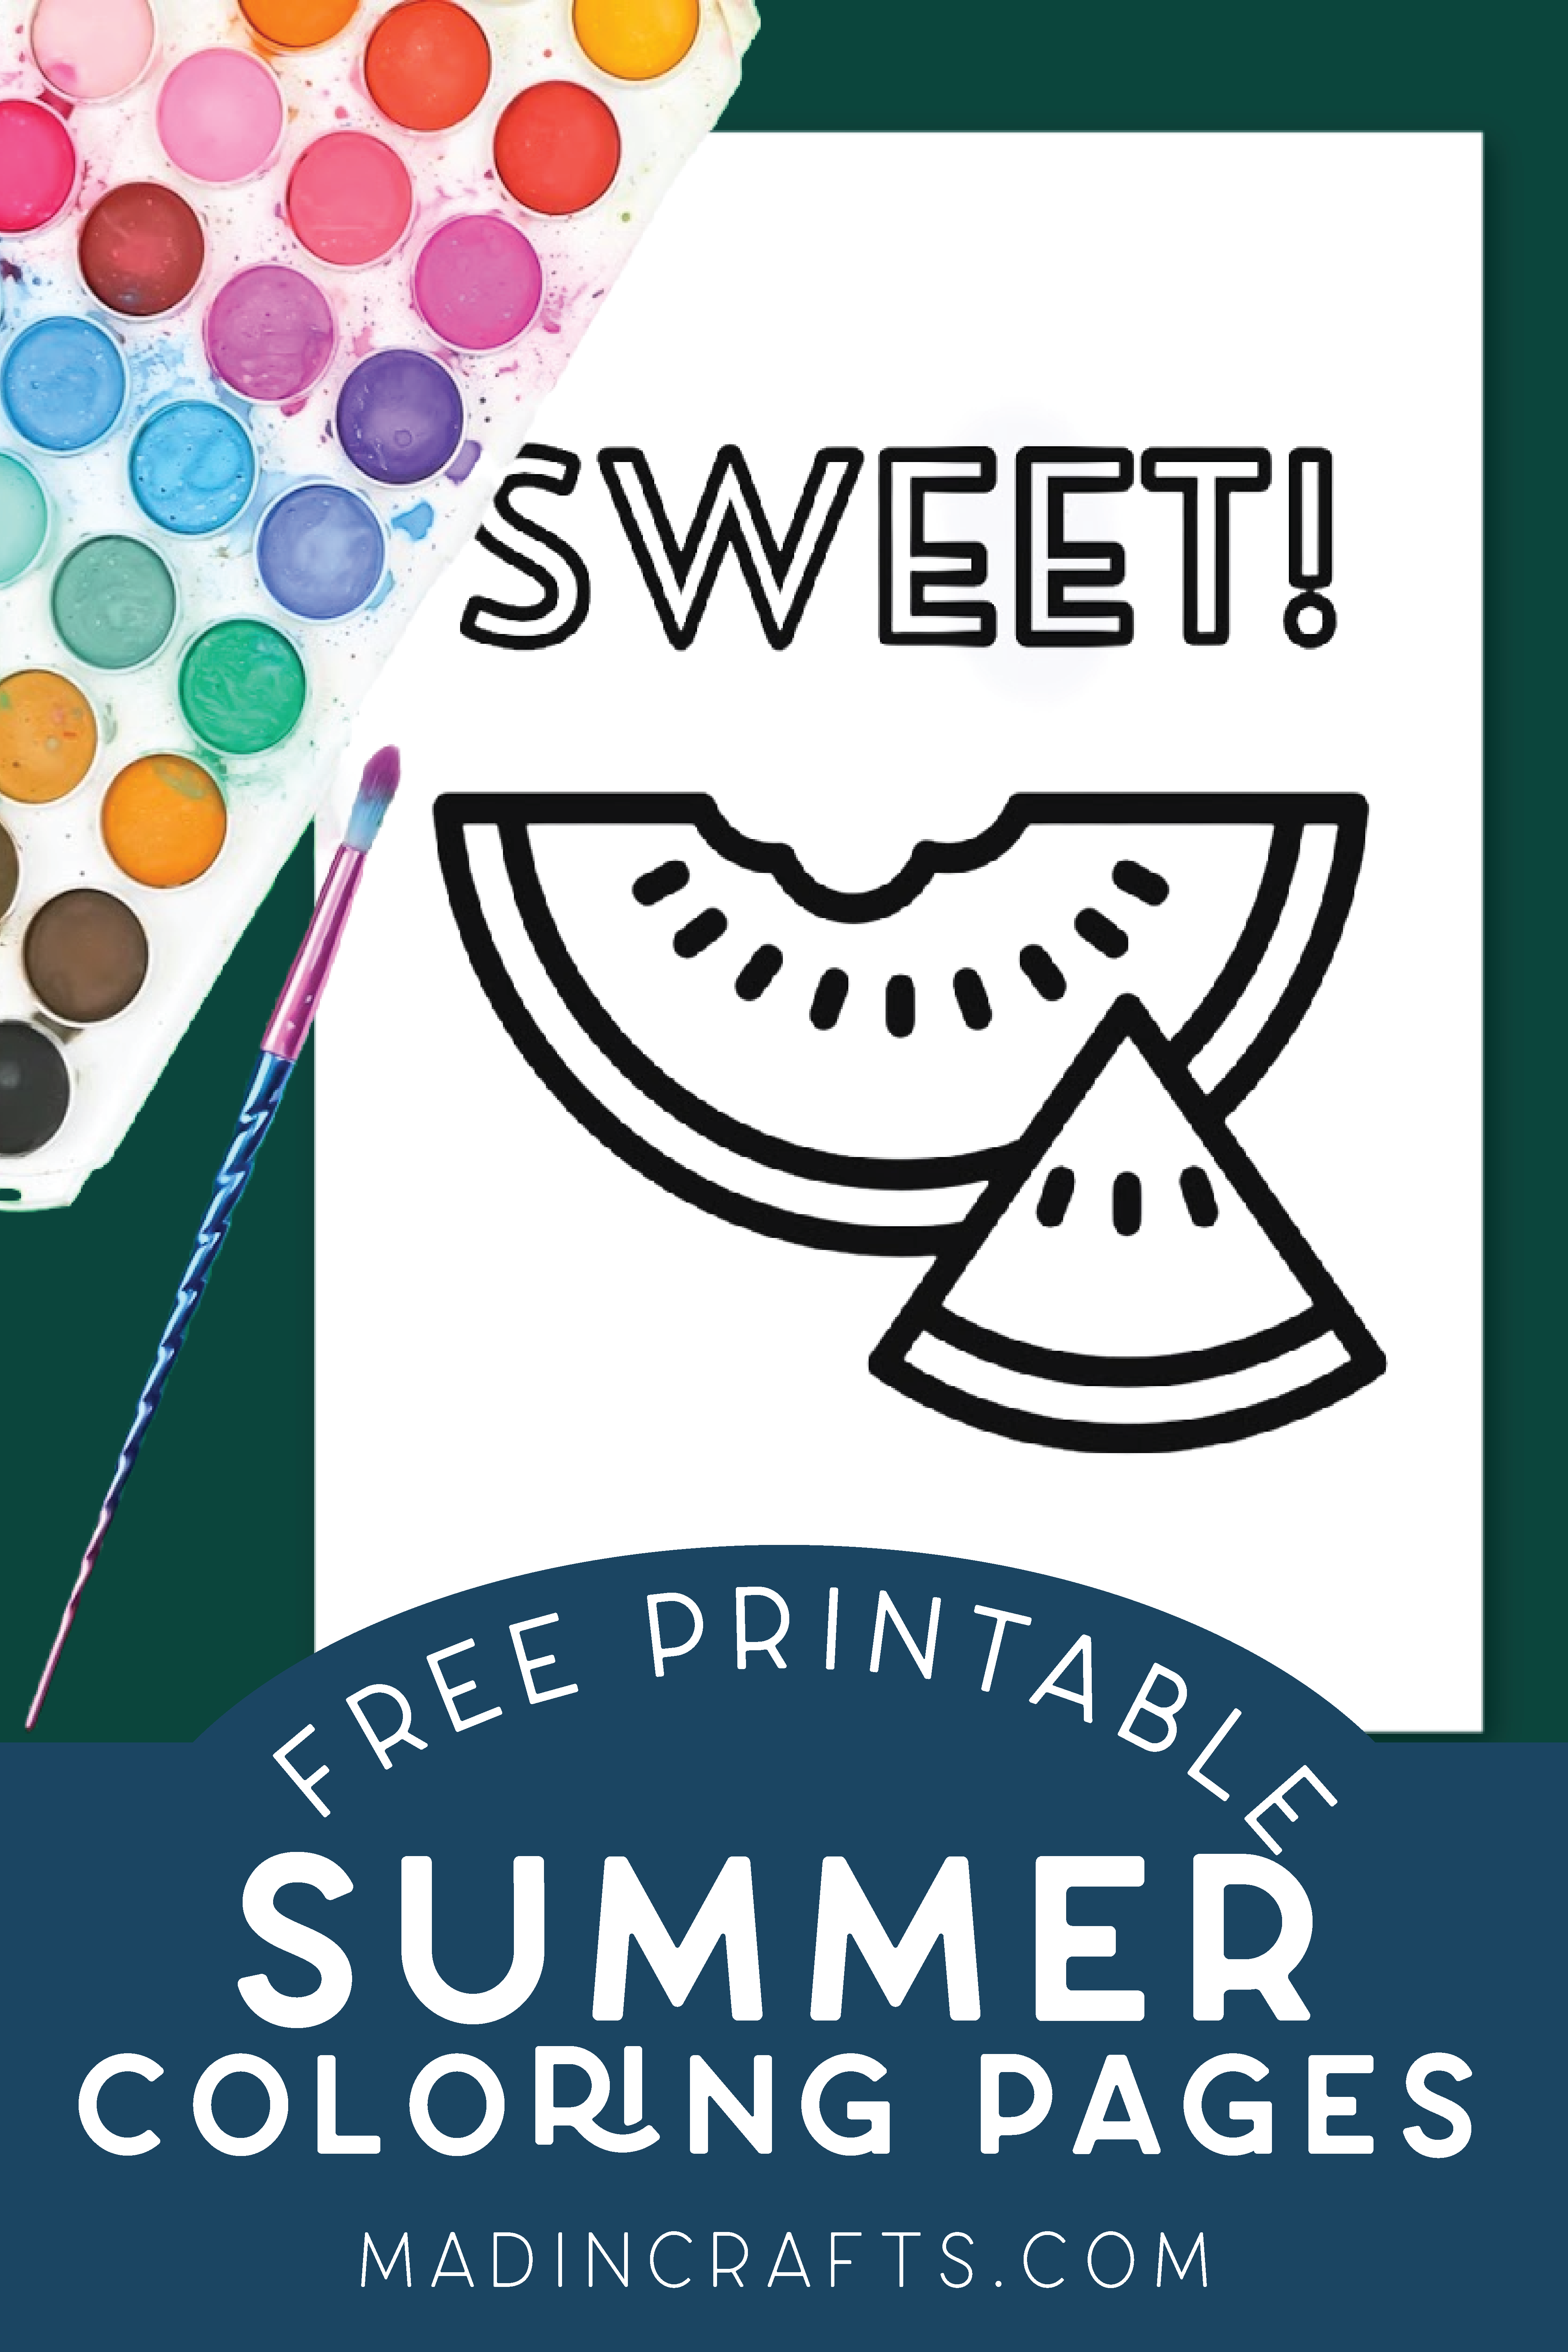 Summer coloring page and watercolors